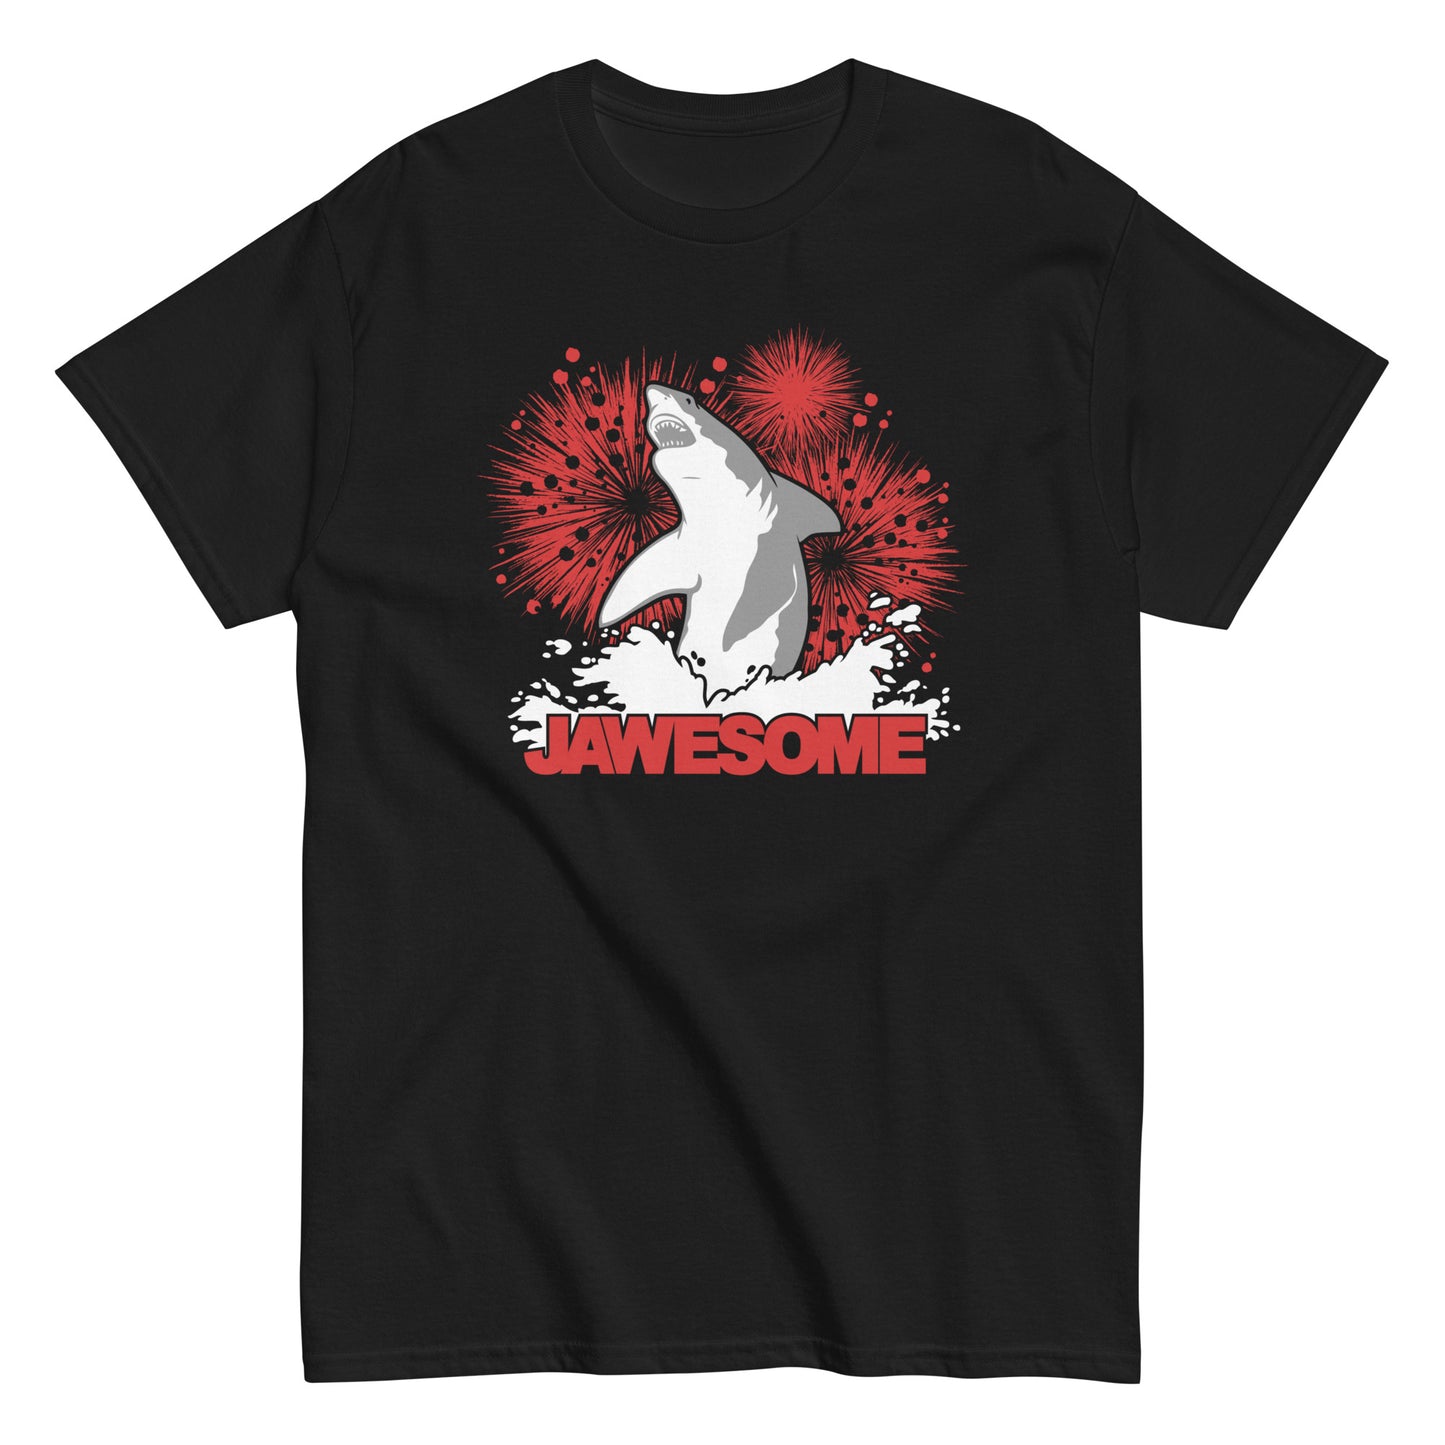 Jawesome! Men's Classic Tee